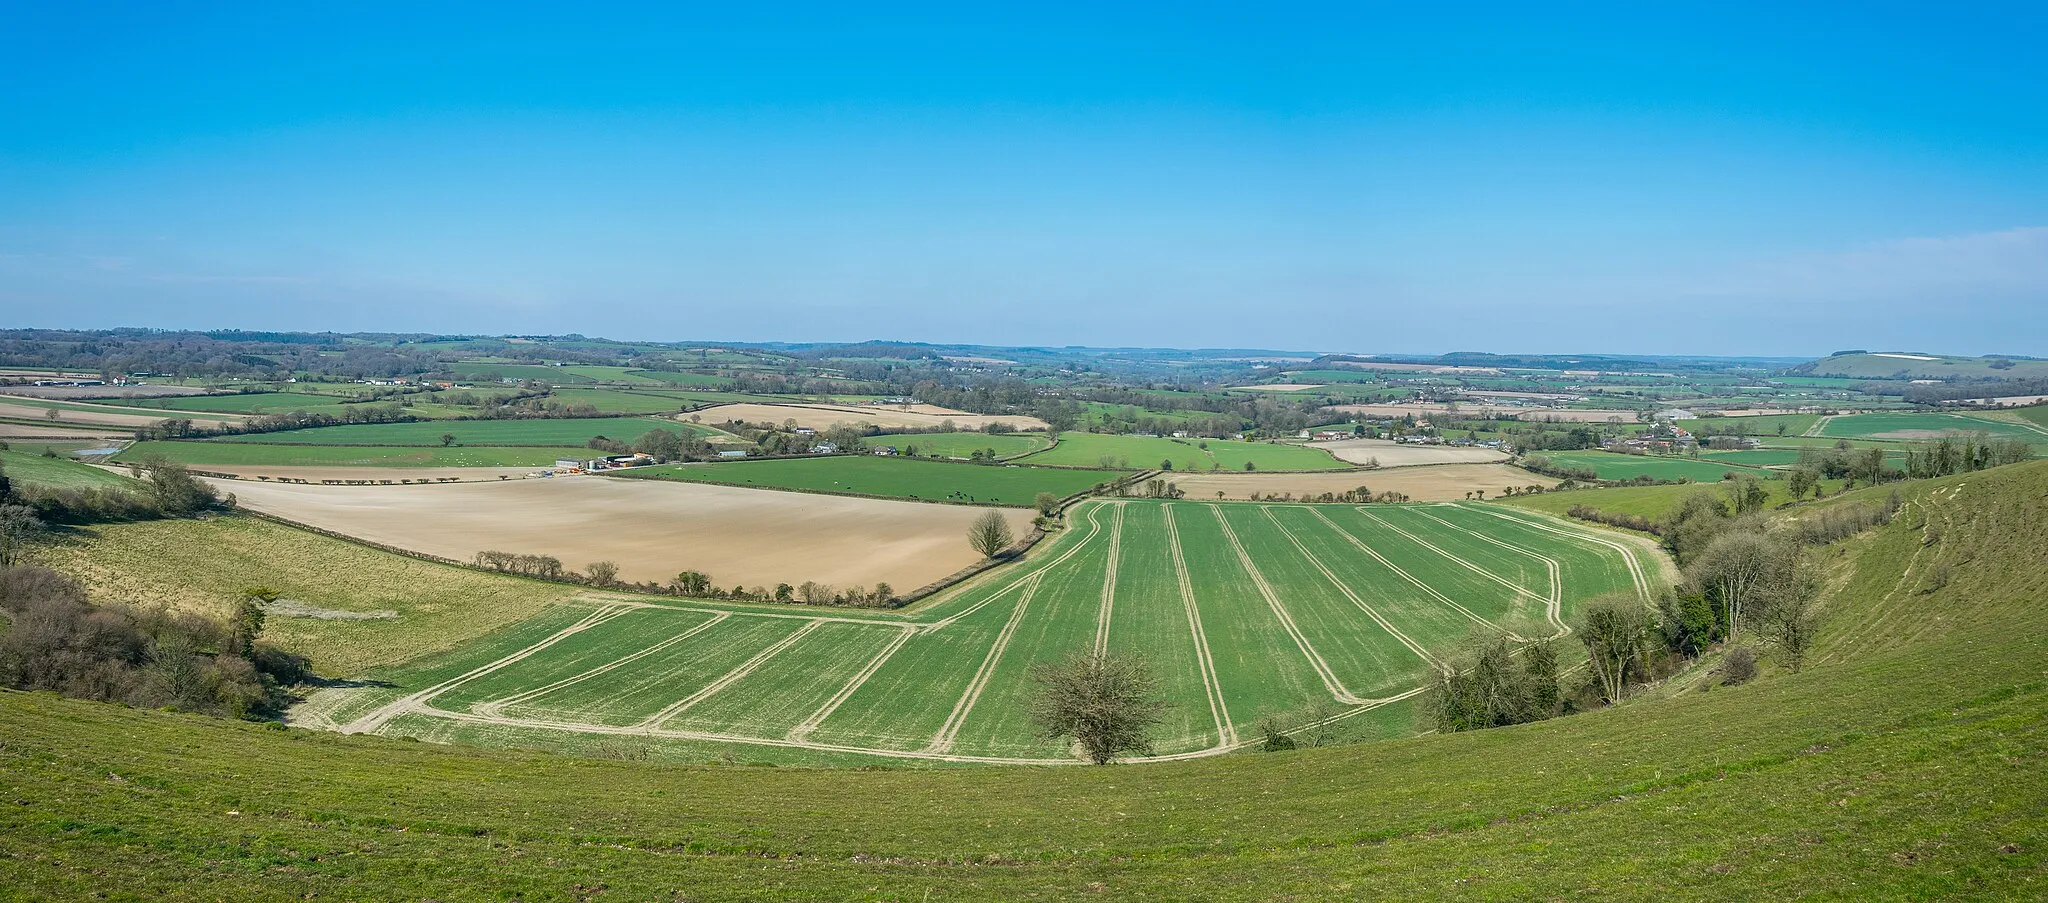 Photo showing: This glorious countryside on the Dorset/Wiltshire border near Shaftesbury seen on a warm spring day. 
Seen from the top of Charlton Down, some 250m above sea level gives far reaching views.